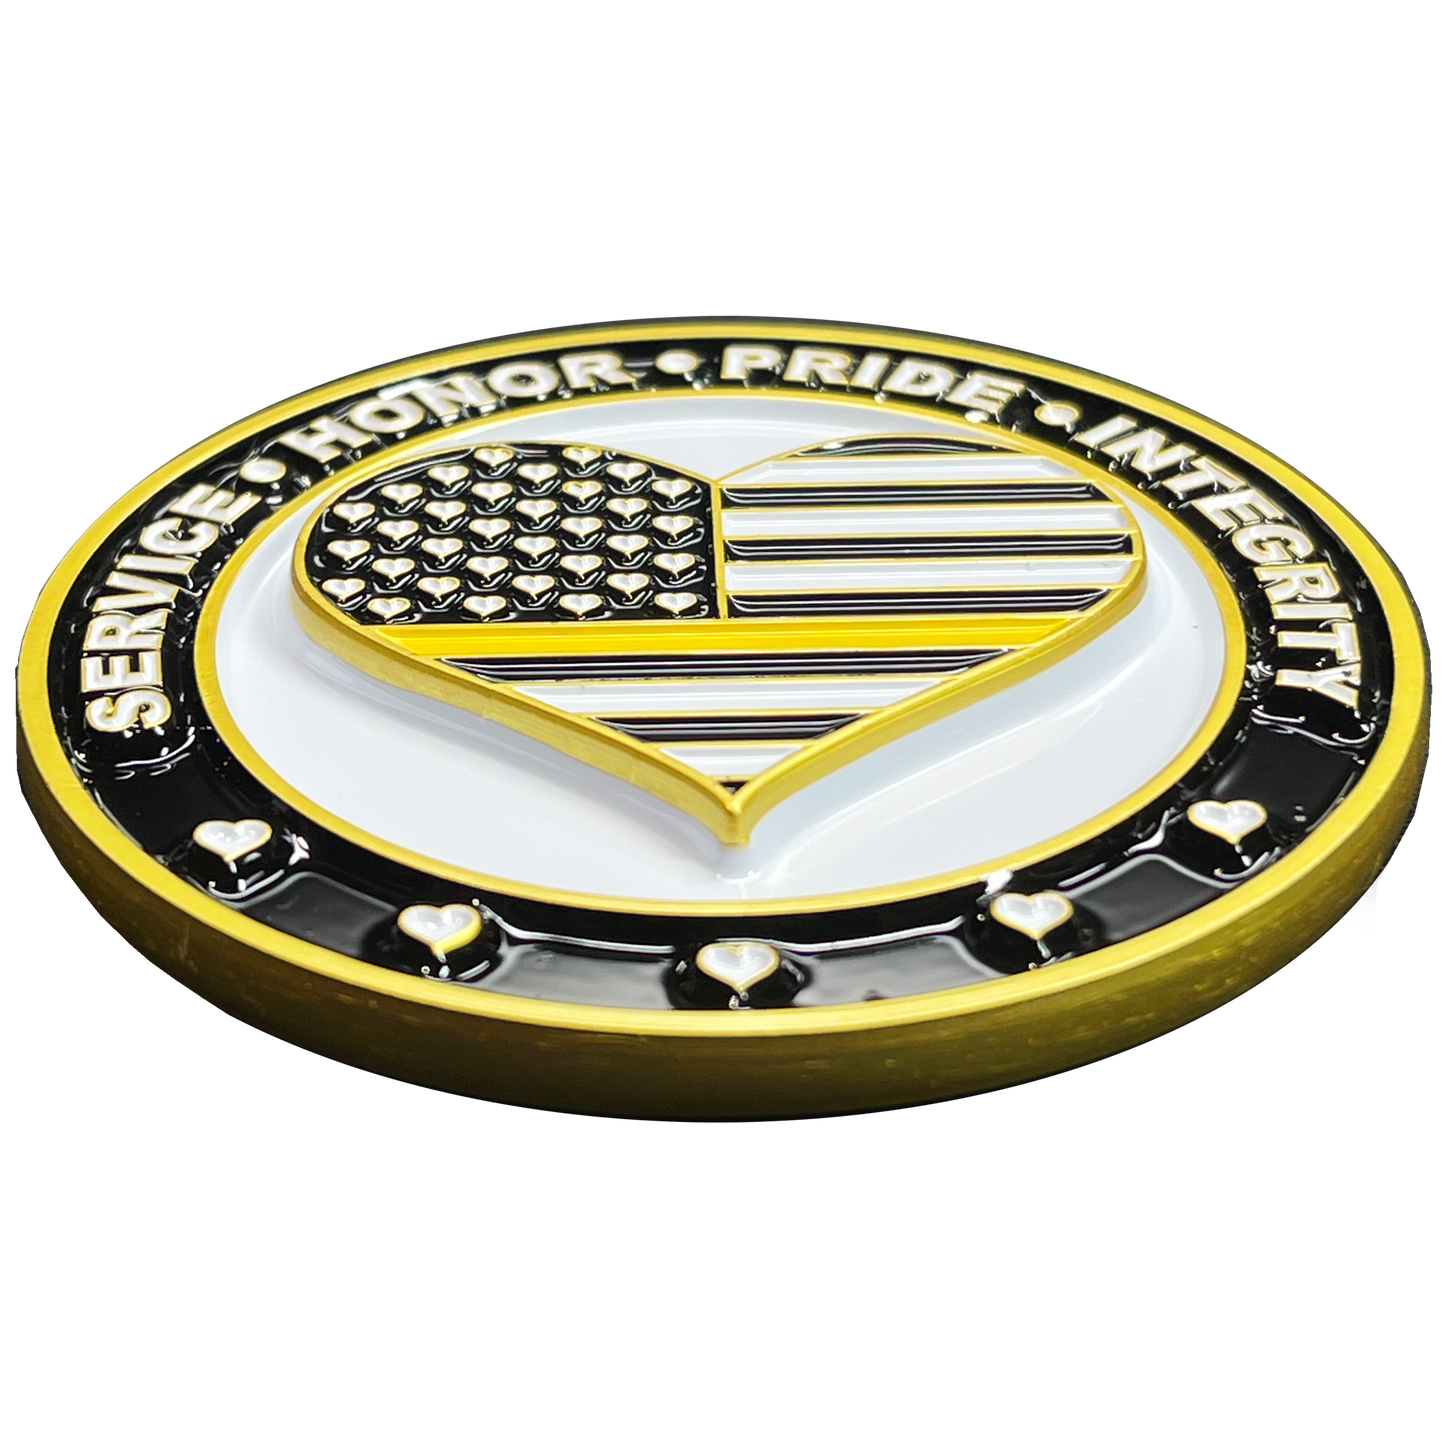 BL3-013 Emergency 911 Police Dispatcher Heart of Gold Challenge Coin Thin Gold Line